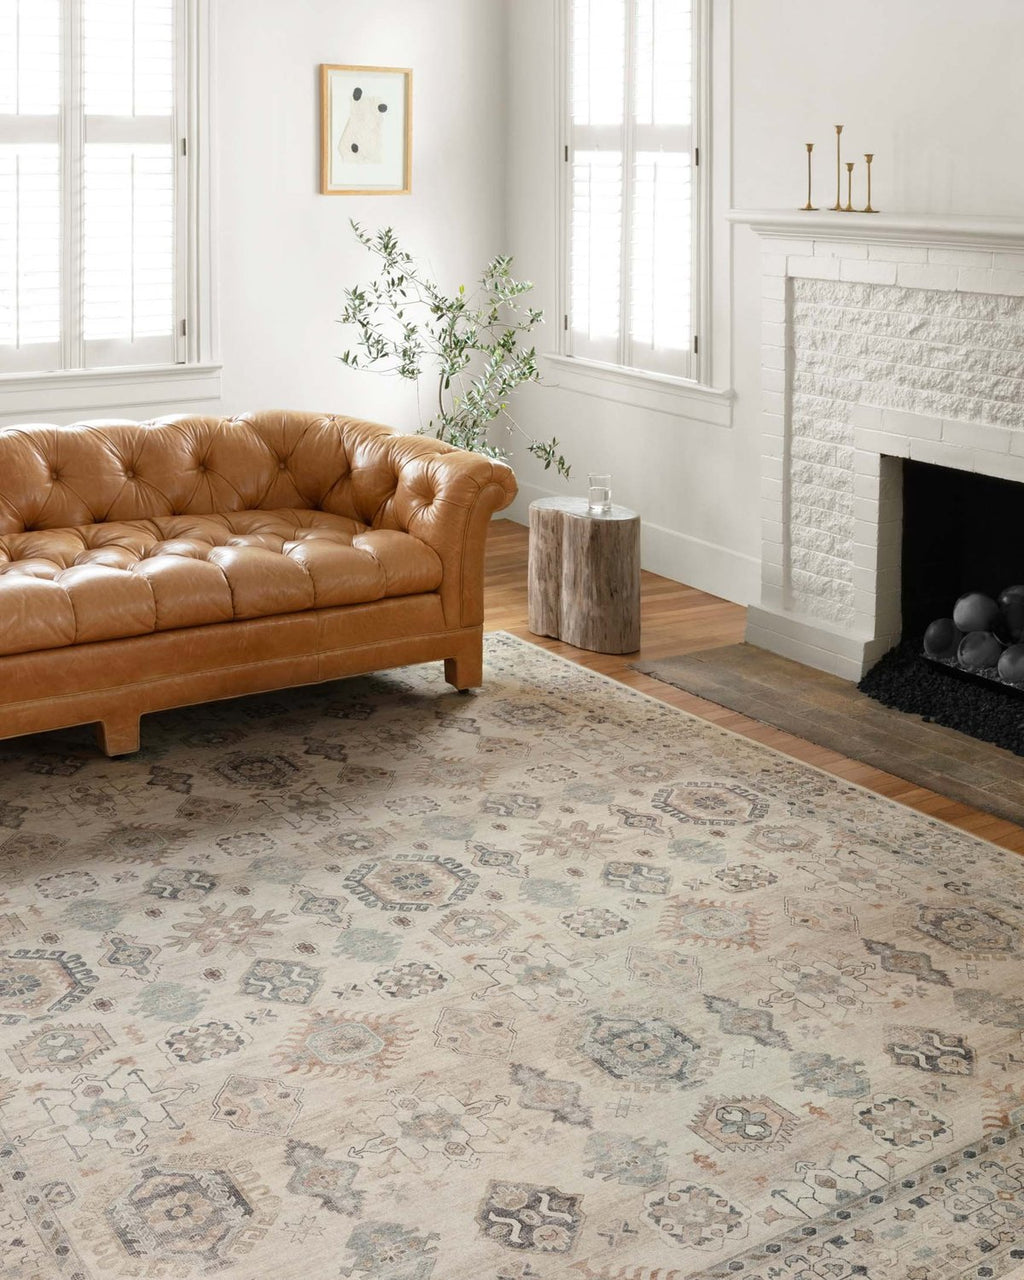 Hathaway Collection Rug in Beige / Multi